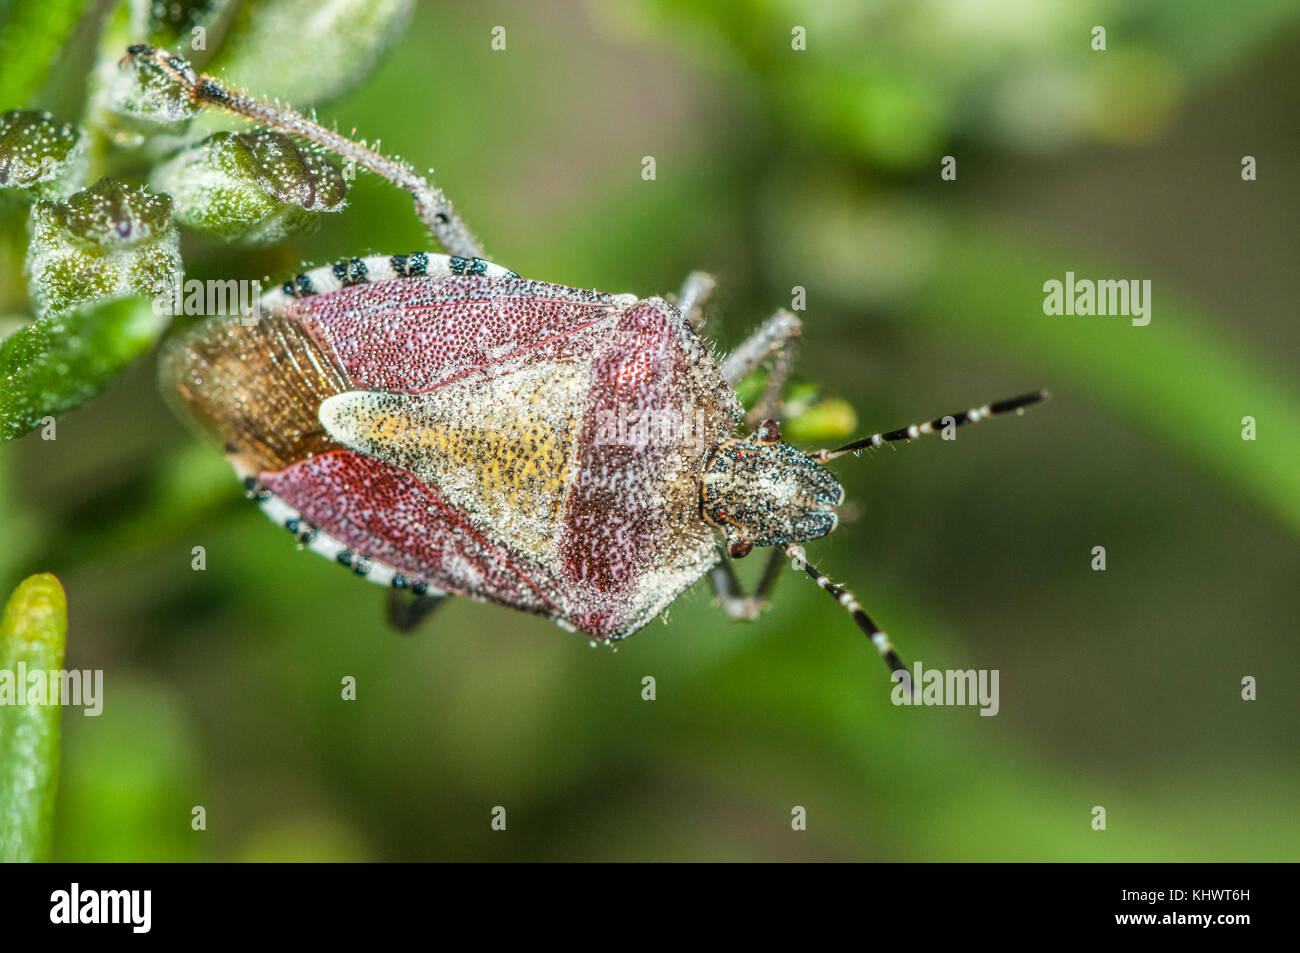 close-up view of a sloe bug (Dolycoris baccarum) Stock Photo